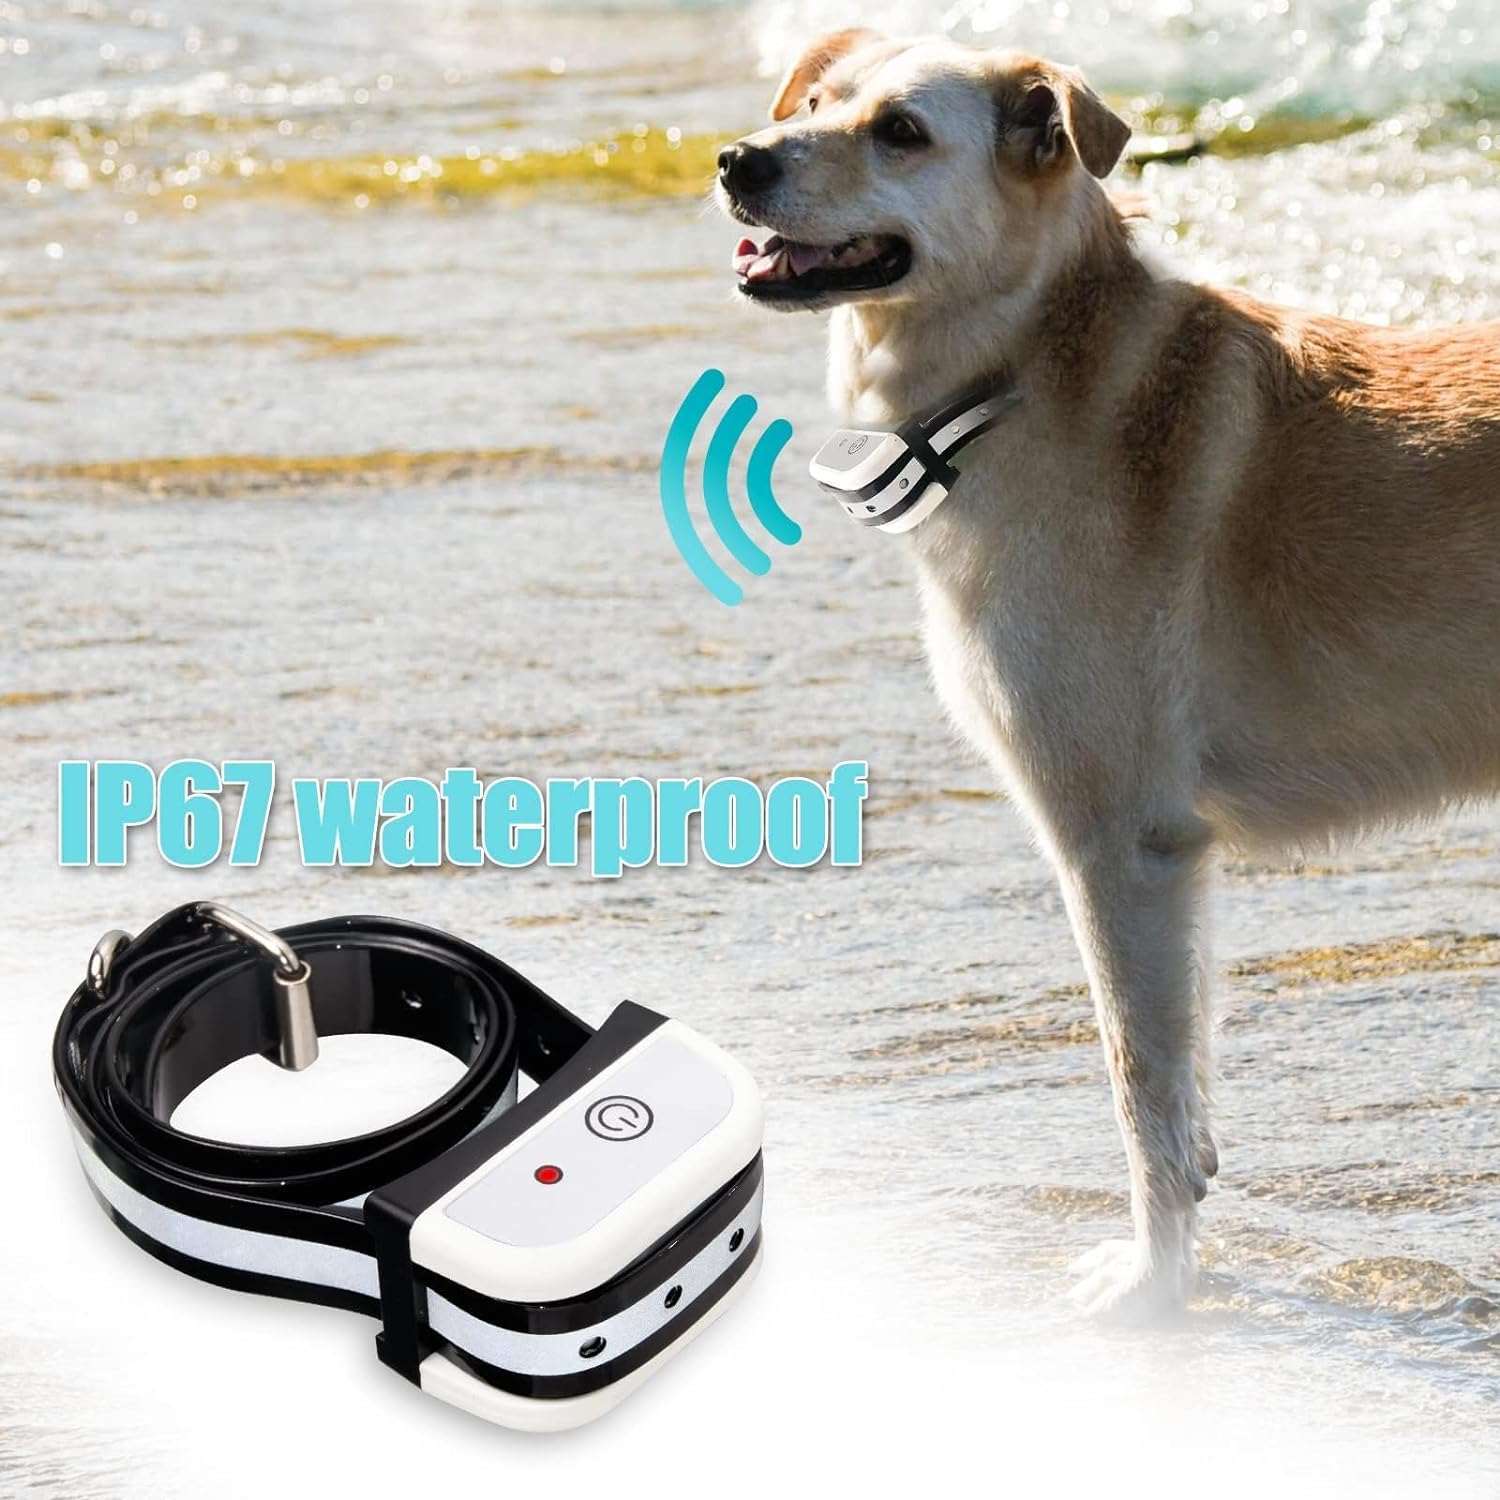 JUSTPET Wireless Dog Fence Electric Pet Containment System, Adjustable Control Range 100 to 990 Feet, Safe Effective No Randomly Over Correction, Rechargeable Waterproof Collar Receiver